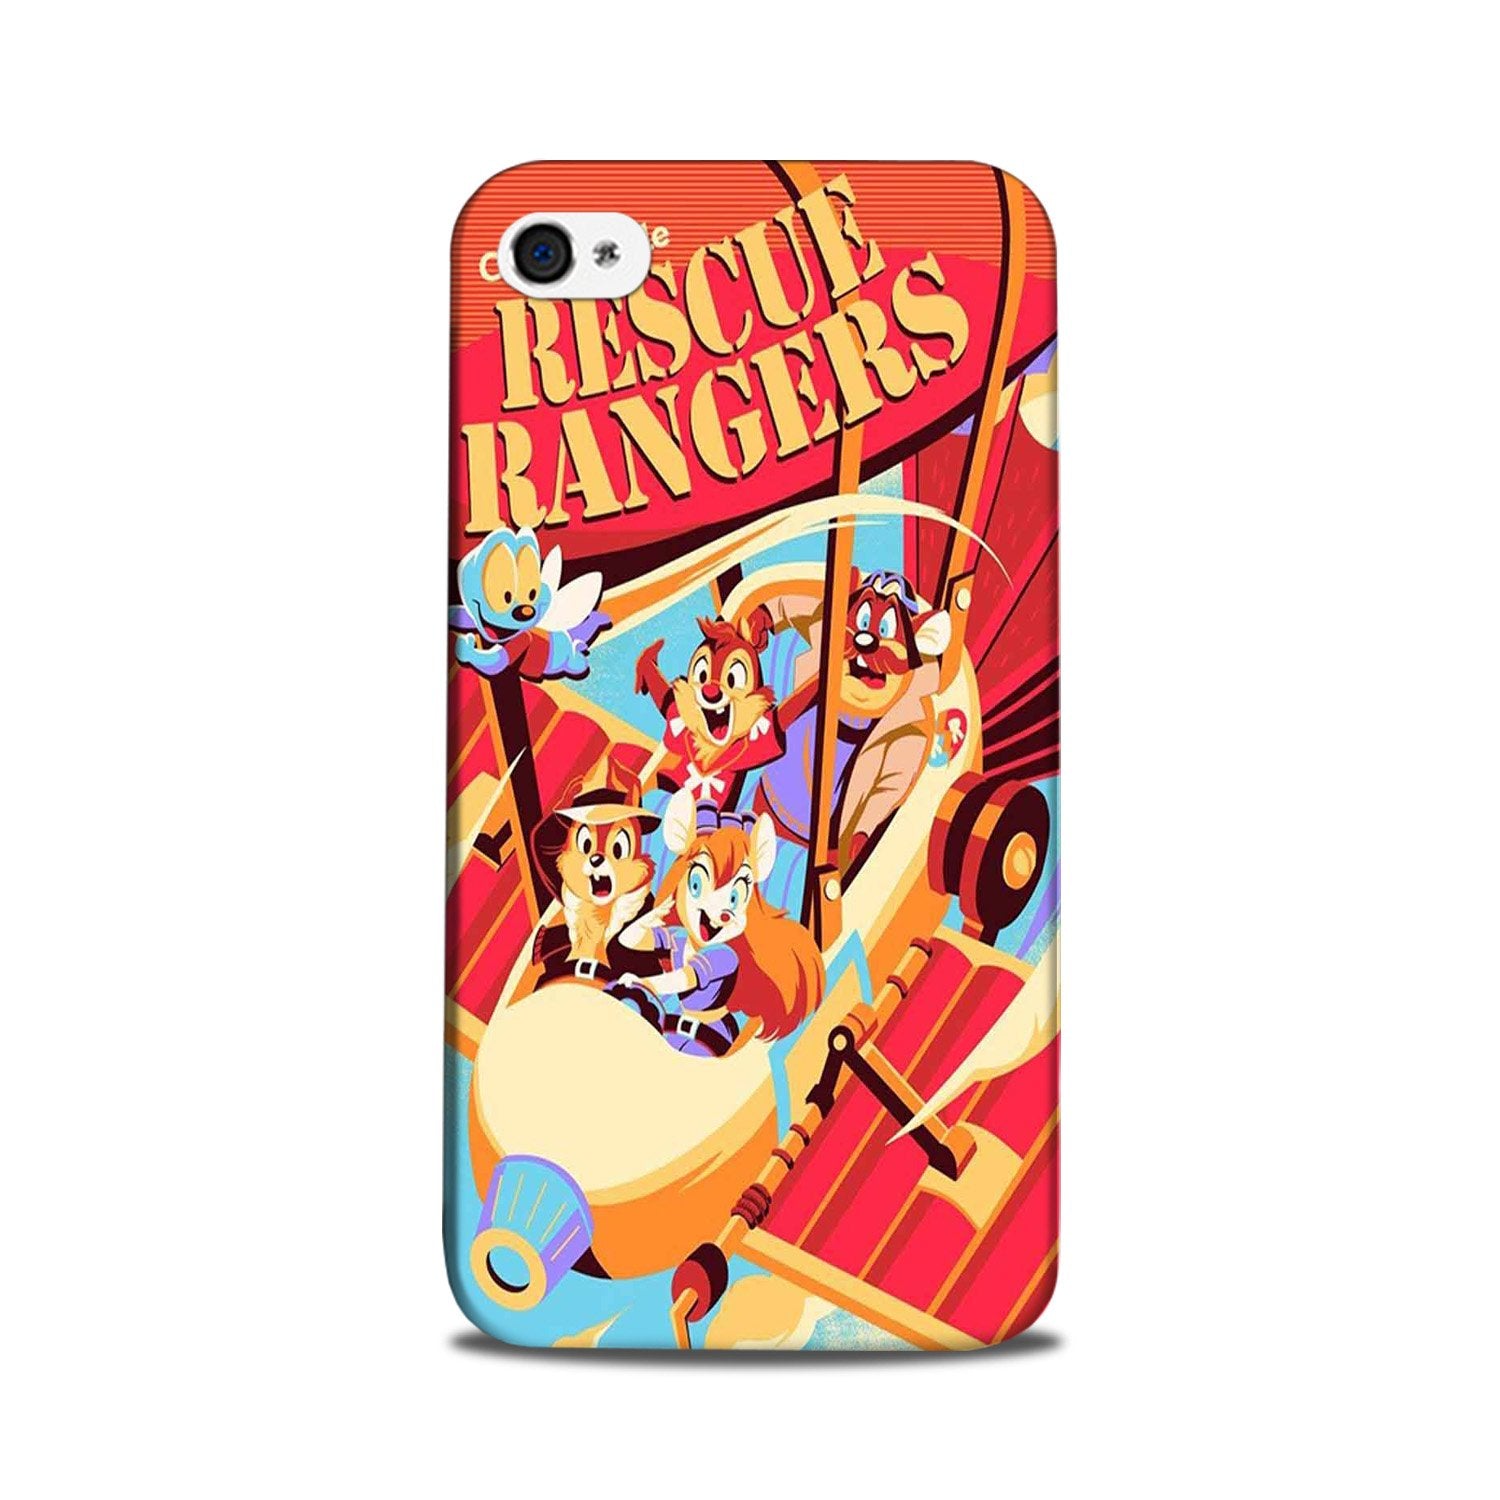 Rescue Rangers Mobile Back Case for iPhone 5/ 5s  (Design - 341)